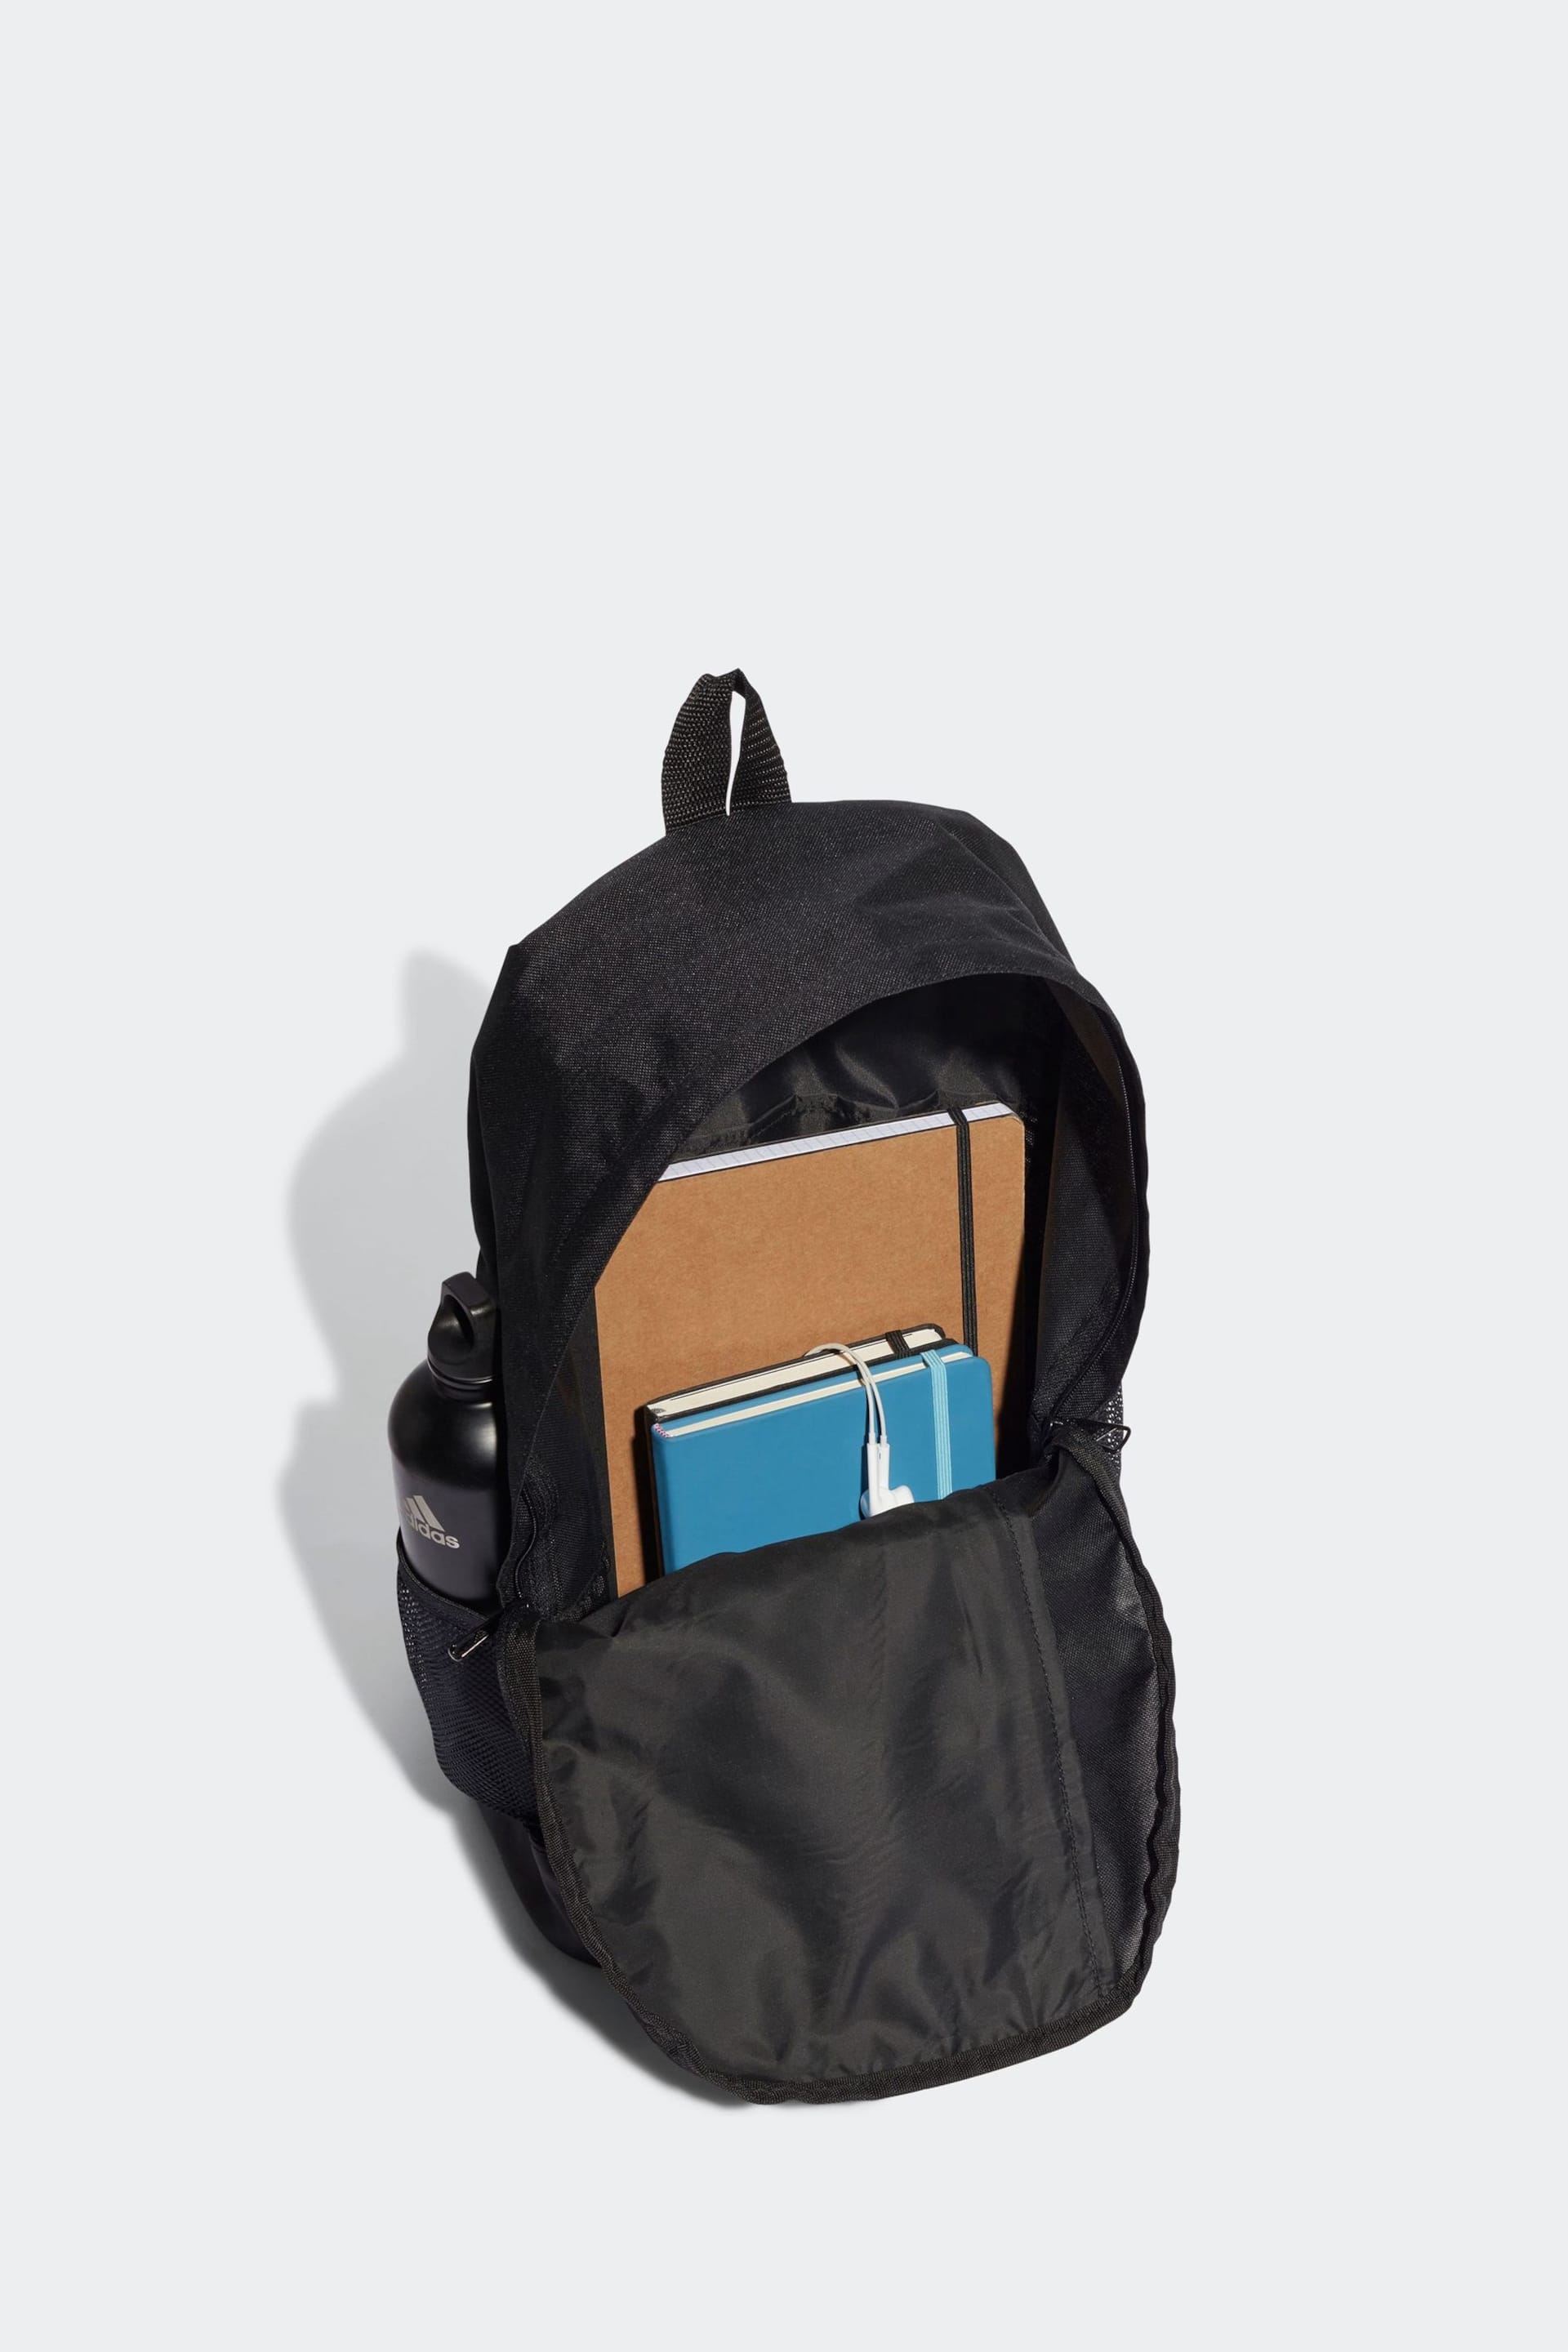 adidas Black Linear Backpack - Image 3 of 5